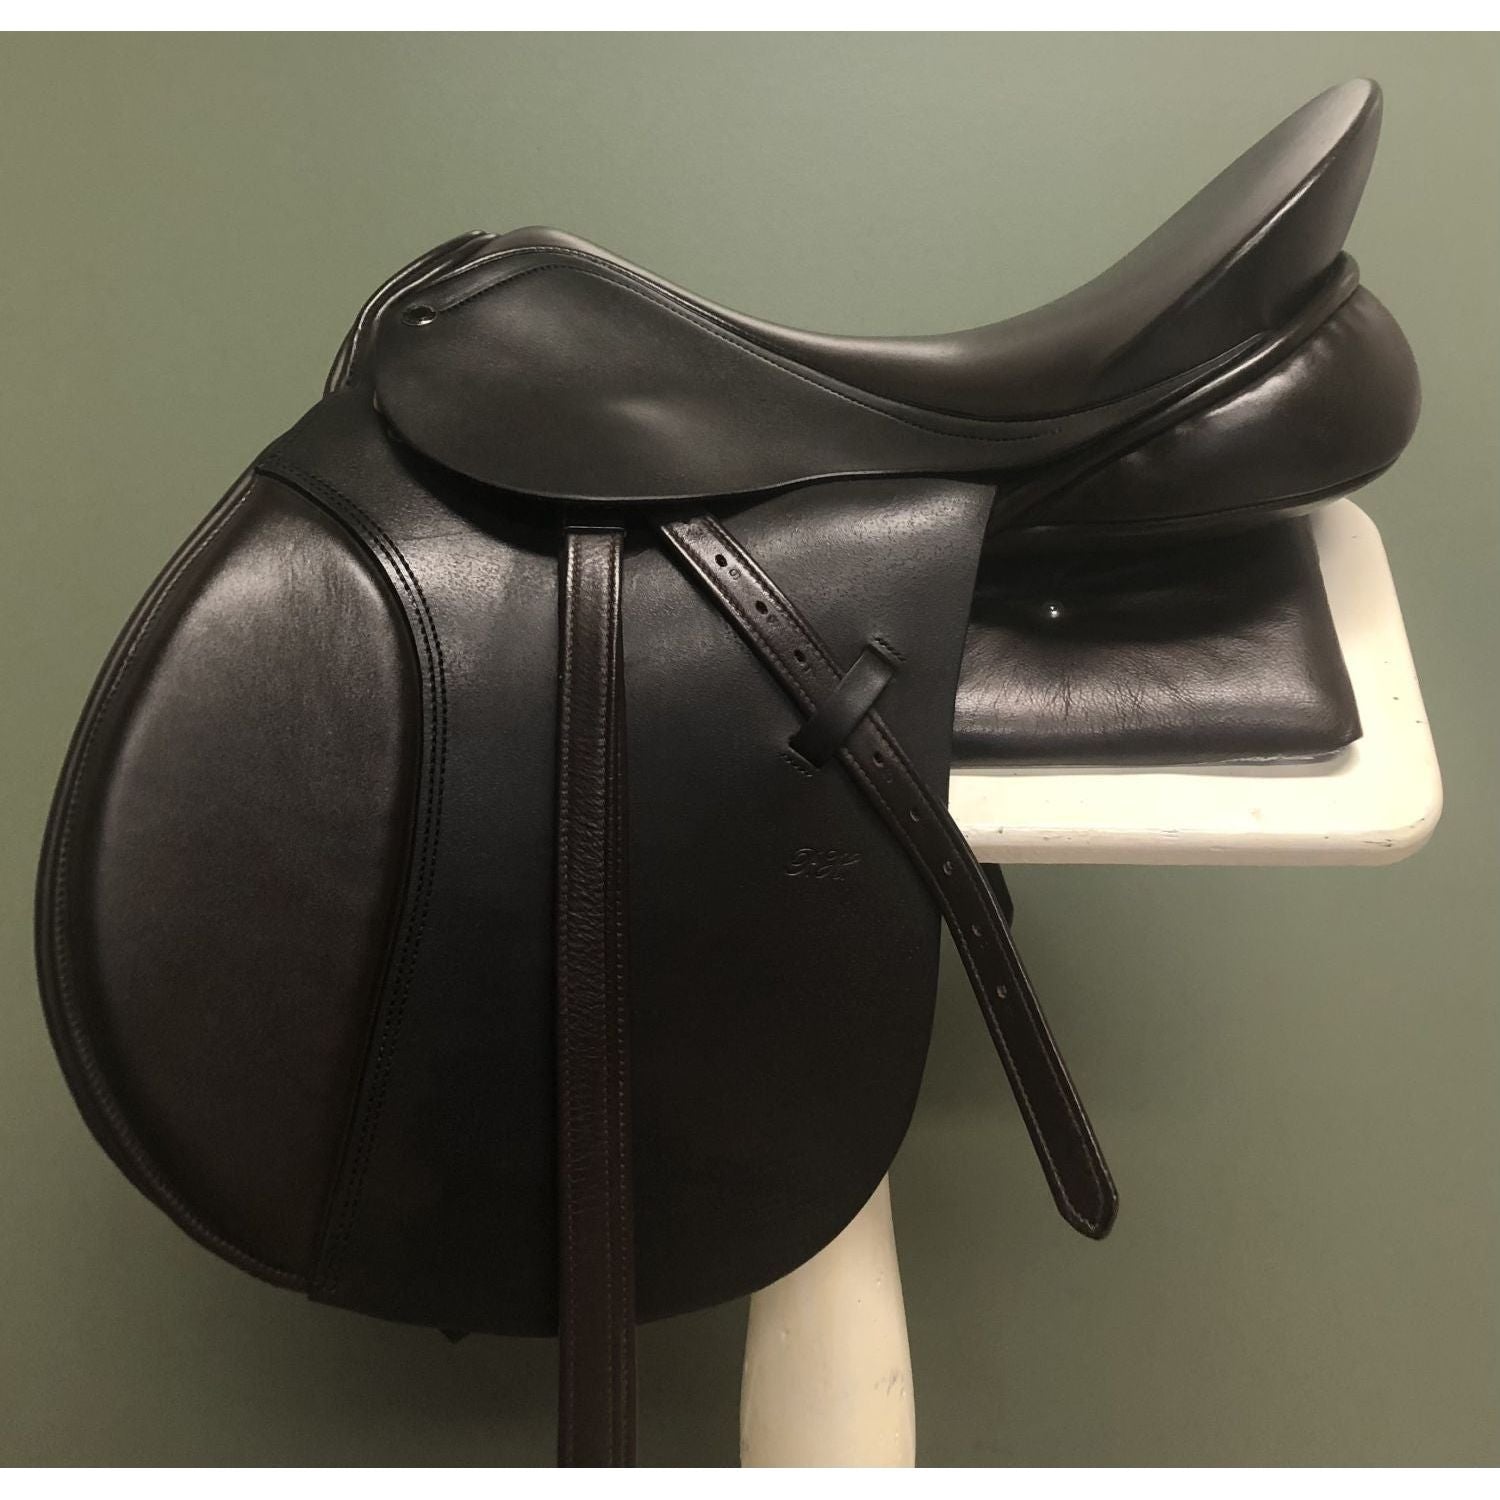 Pre-loved PH JUMP SADDLE 18" BROWN - PRICE INCLUDES ACCESSORIES!